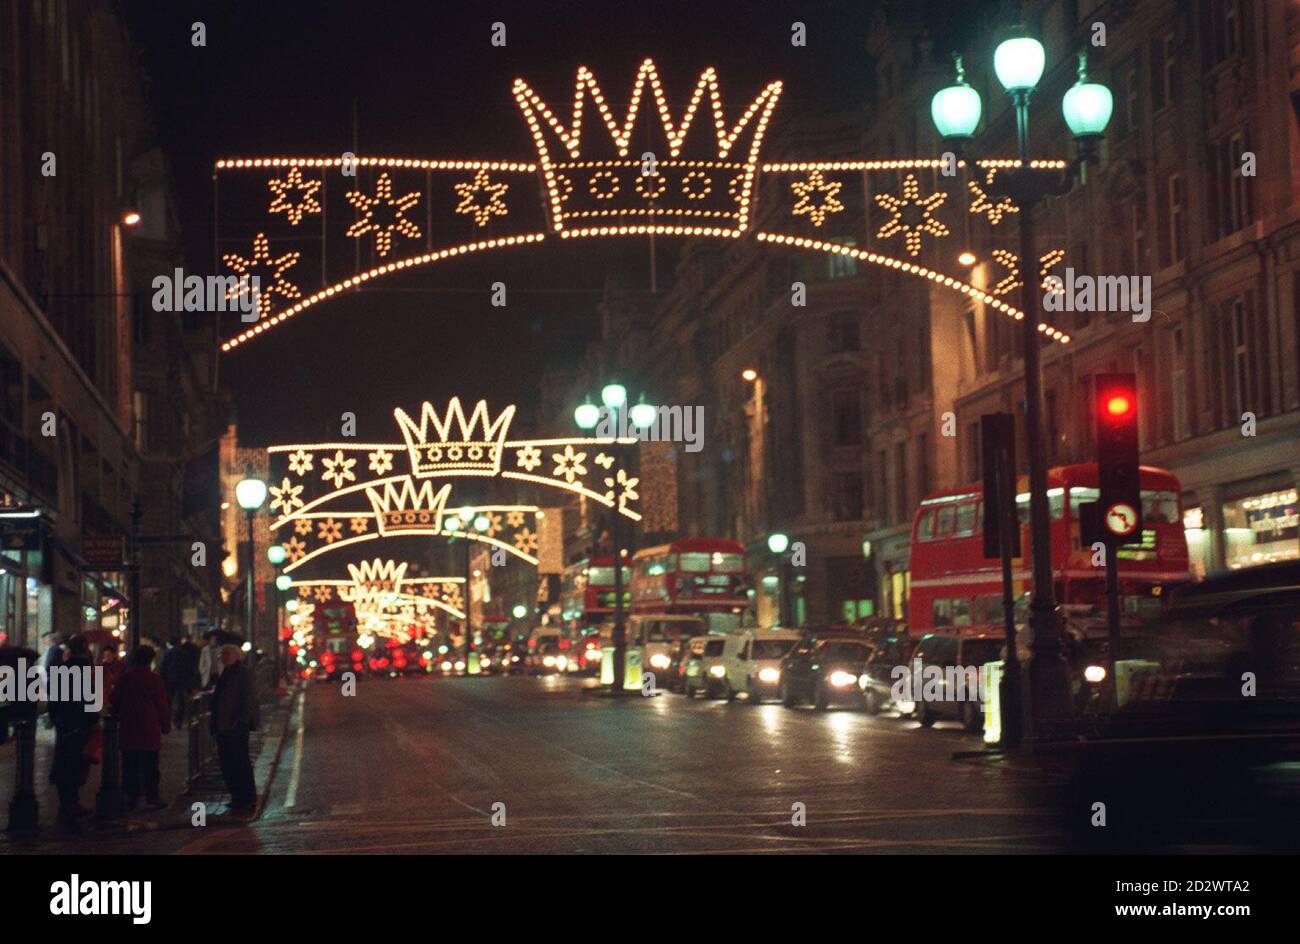 The Christmas lights in London's Regent Street, which were turned on by pantomime stars Lesley Joseph and Britt Ekland. Stock Photo